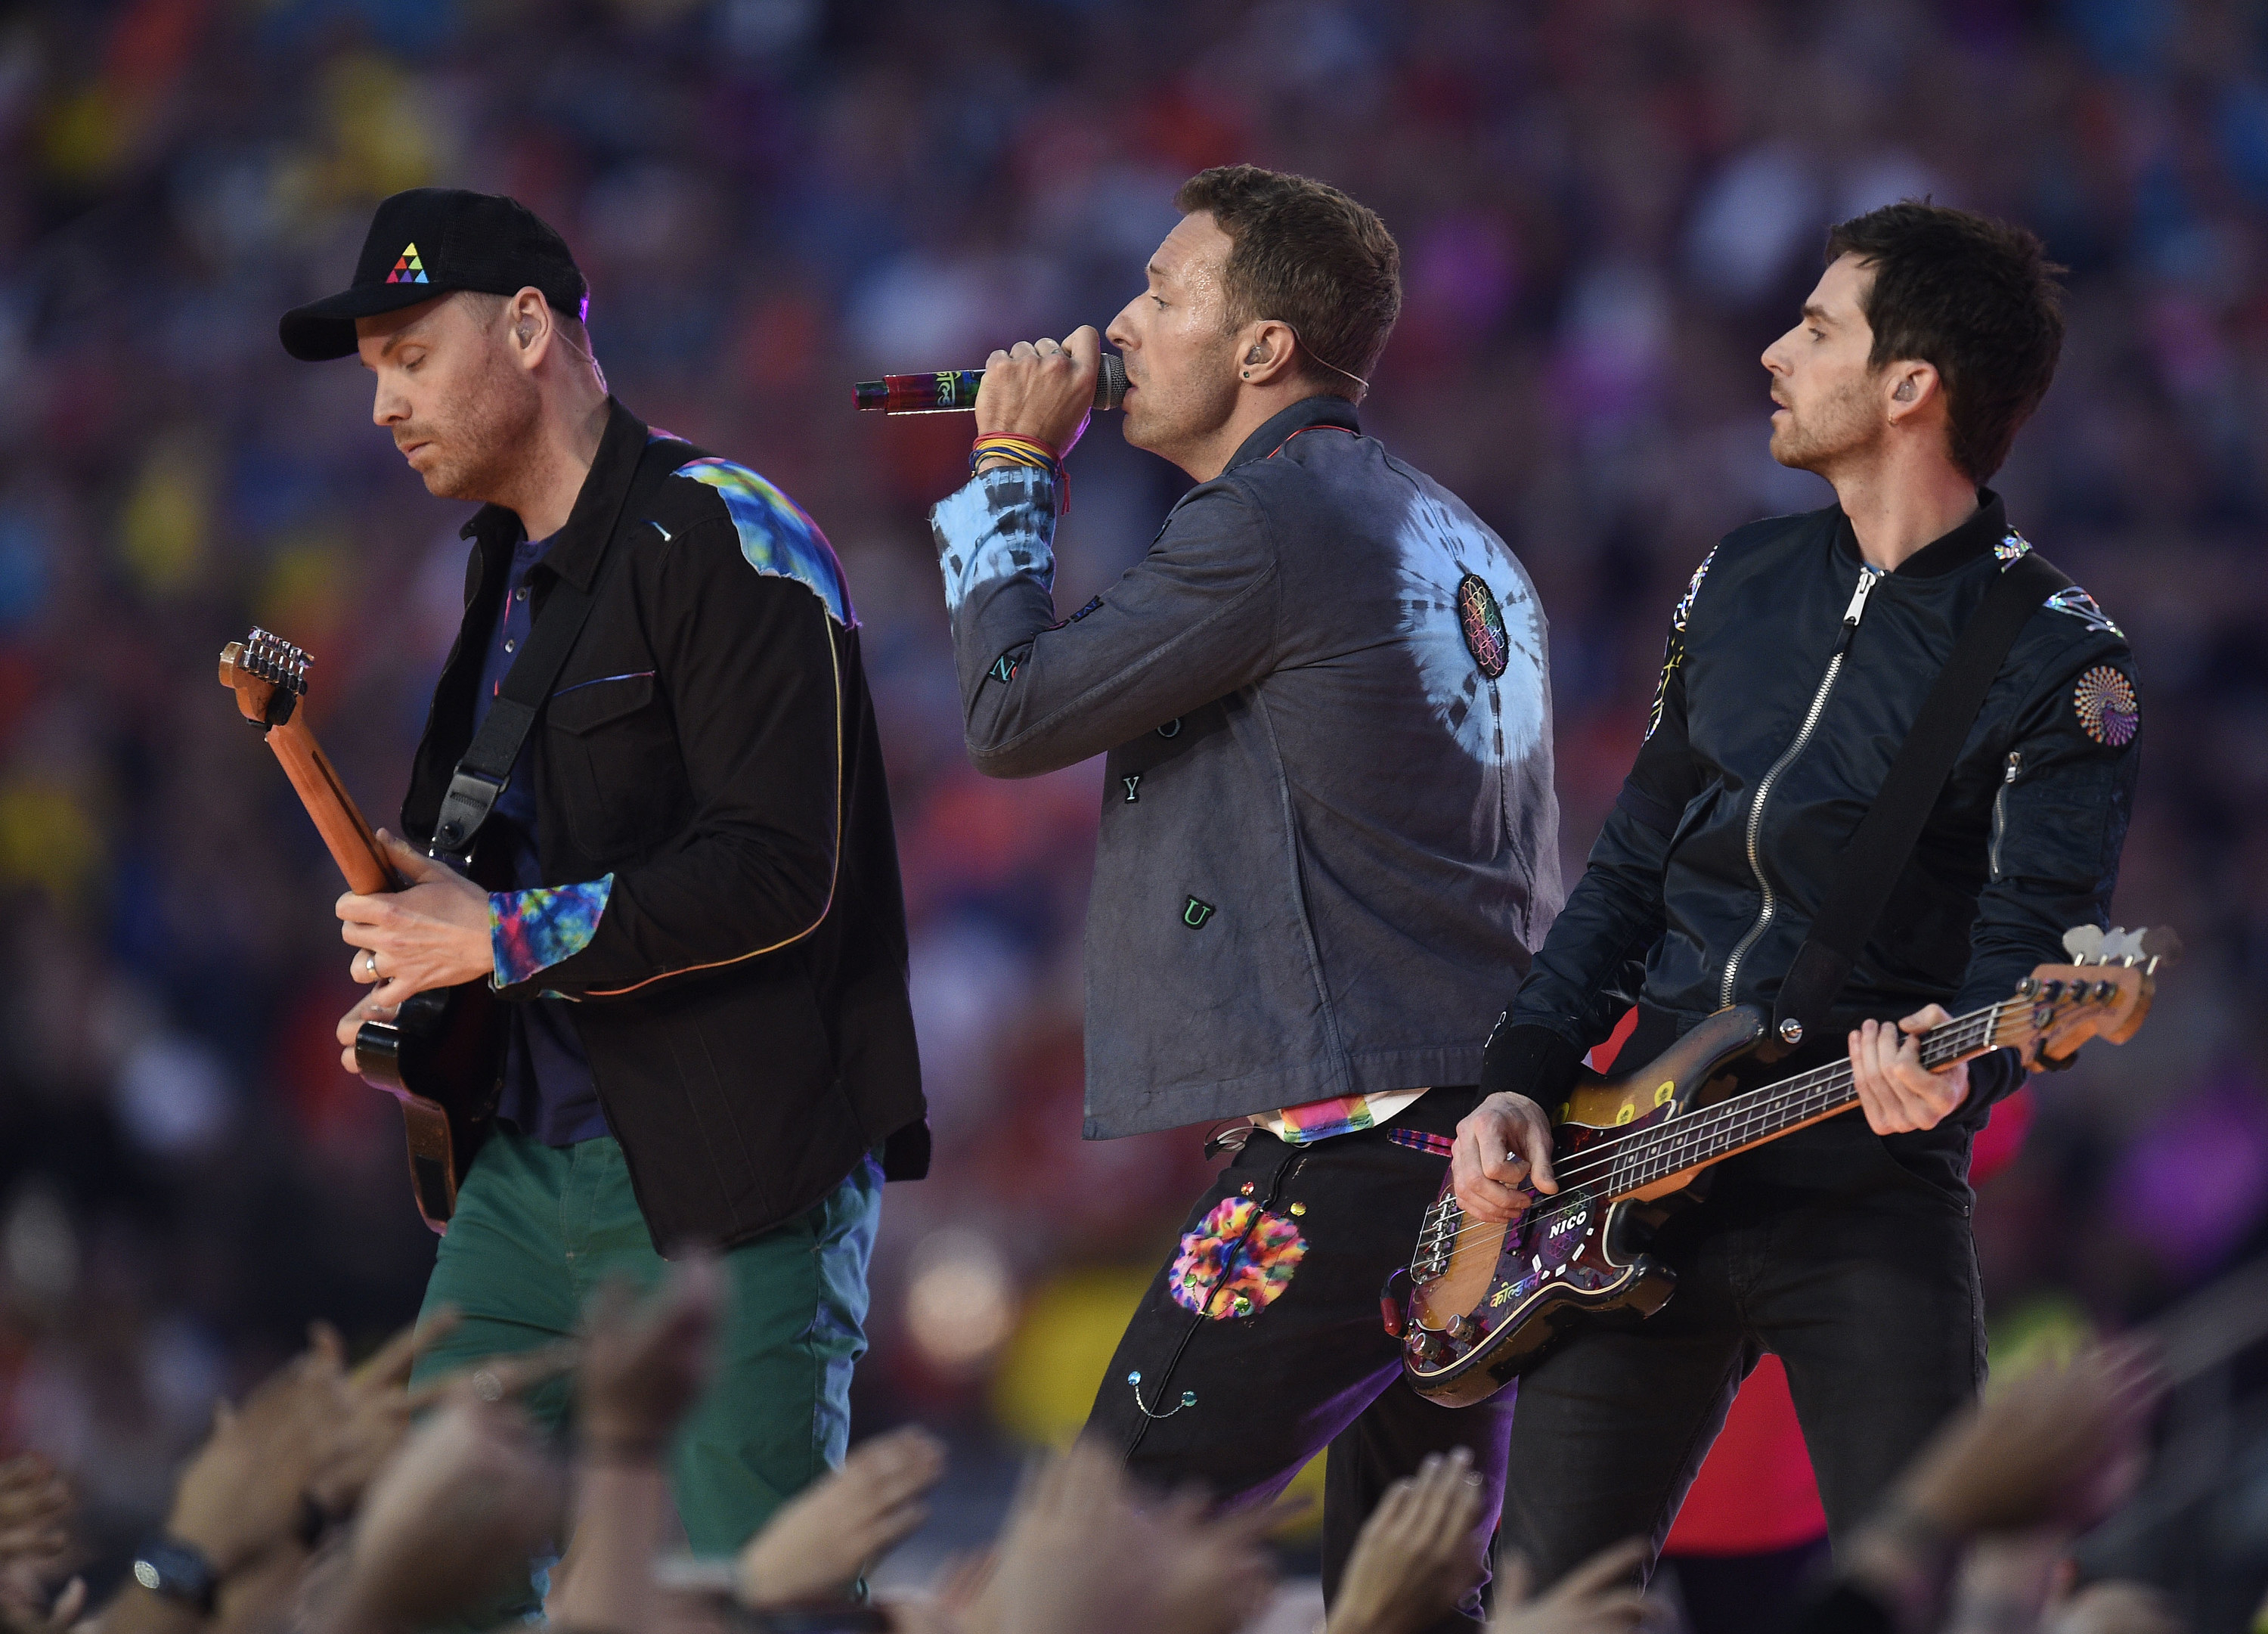 Chris Martin, center, performs with Coldplay during halftime of Super Bowl 50